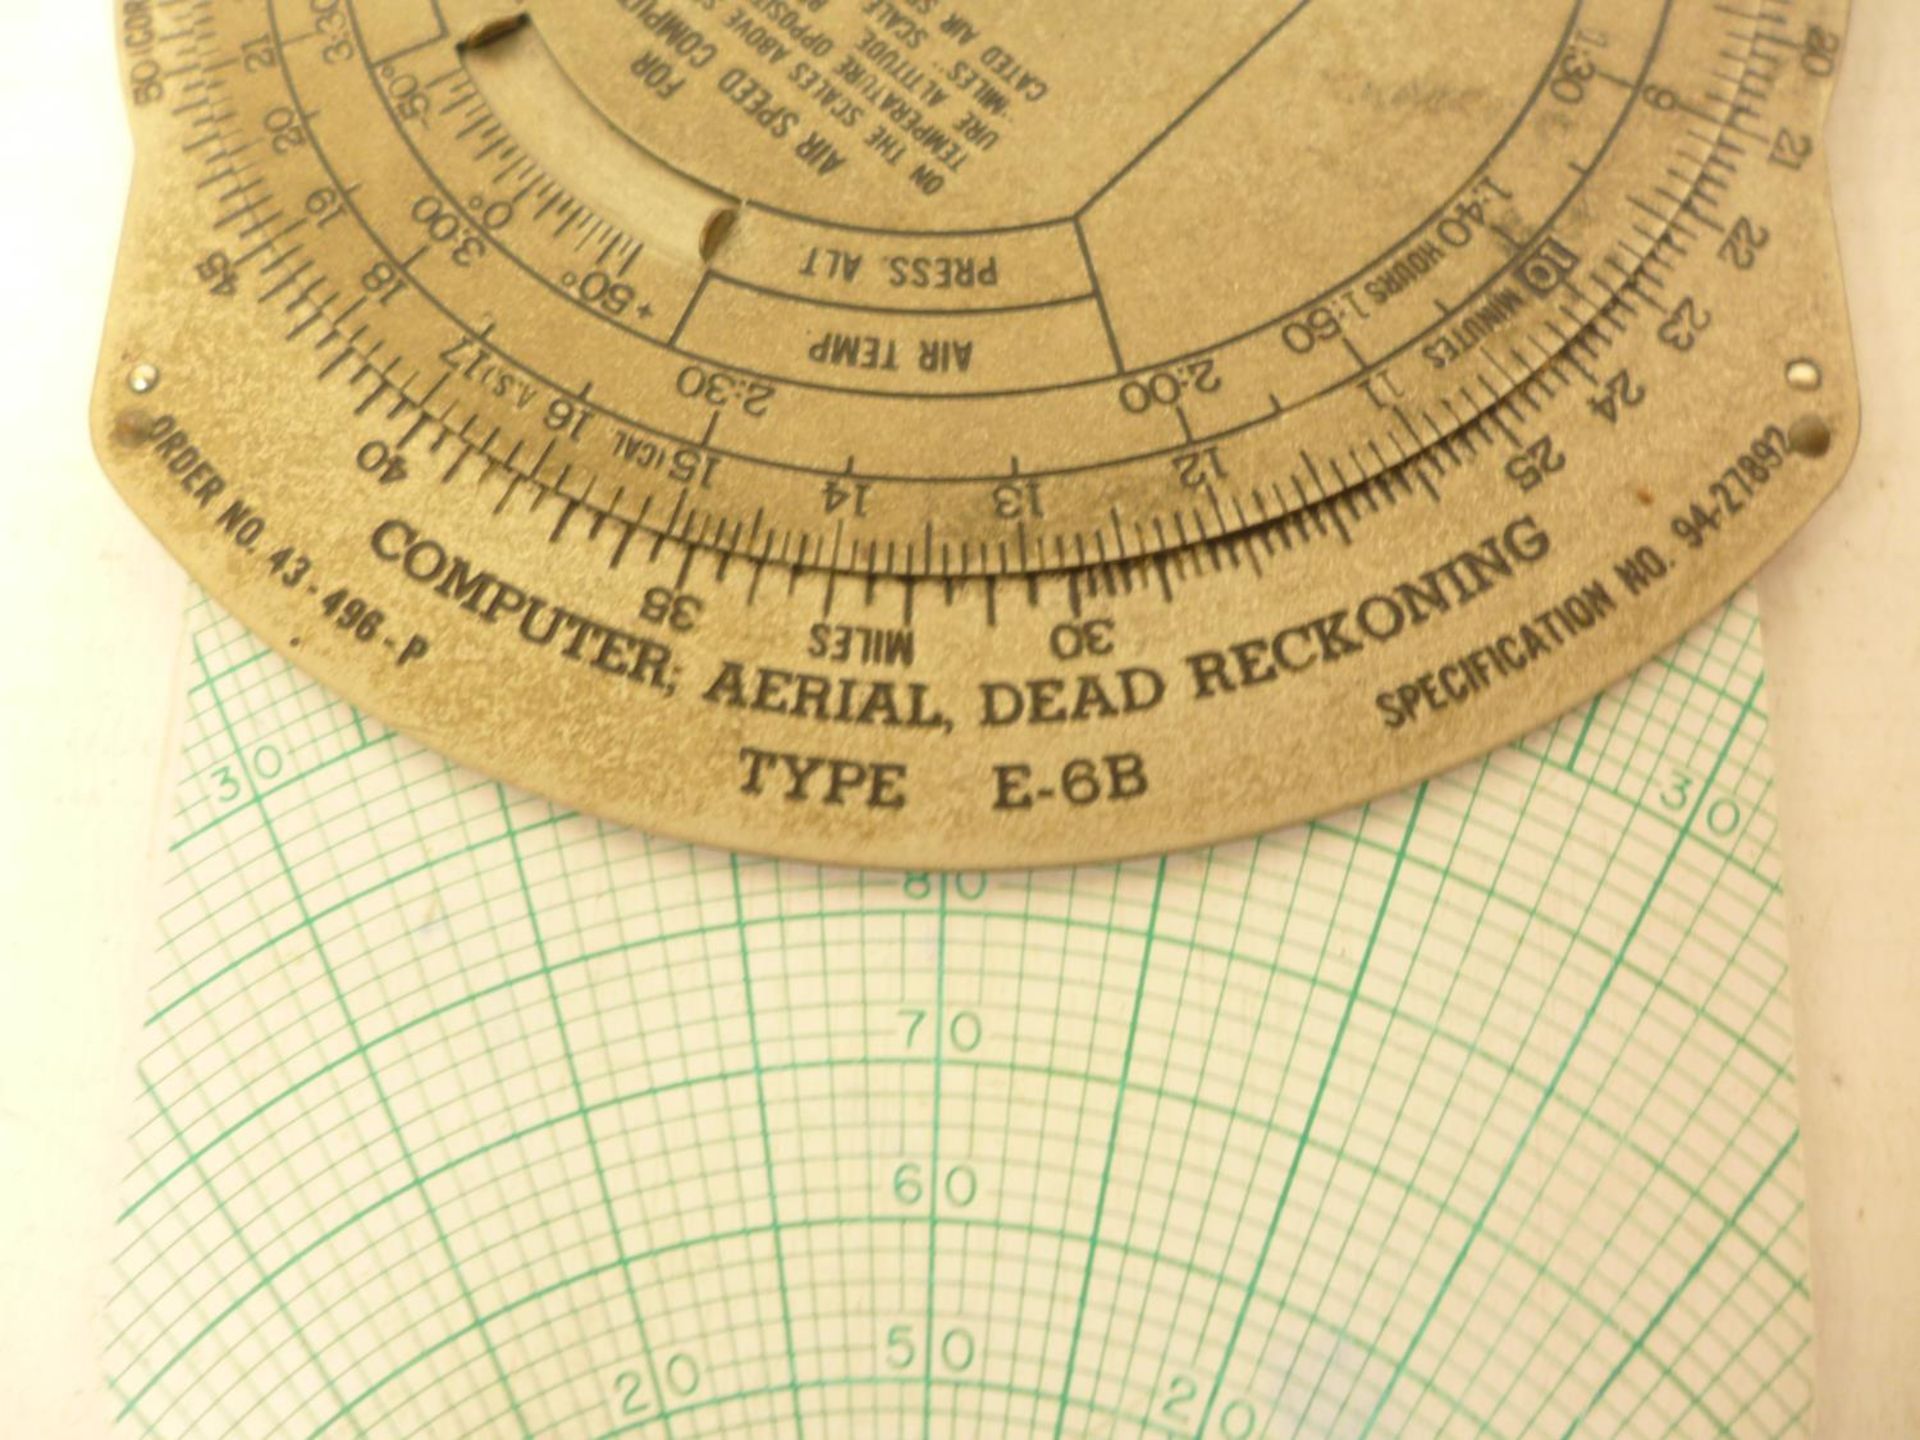 A U.S. AIRFORCE CASED COMPUTER AERIAL DEAD RECKONER TYPE E6B - Image 3 of 4